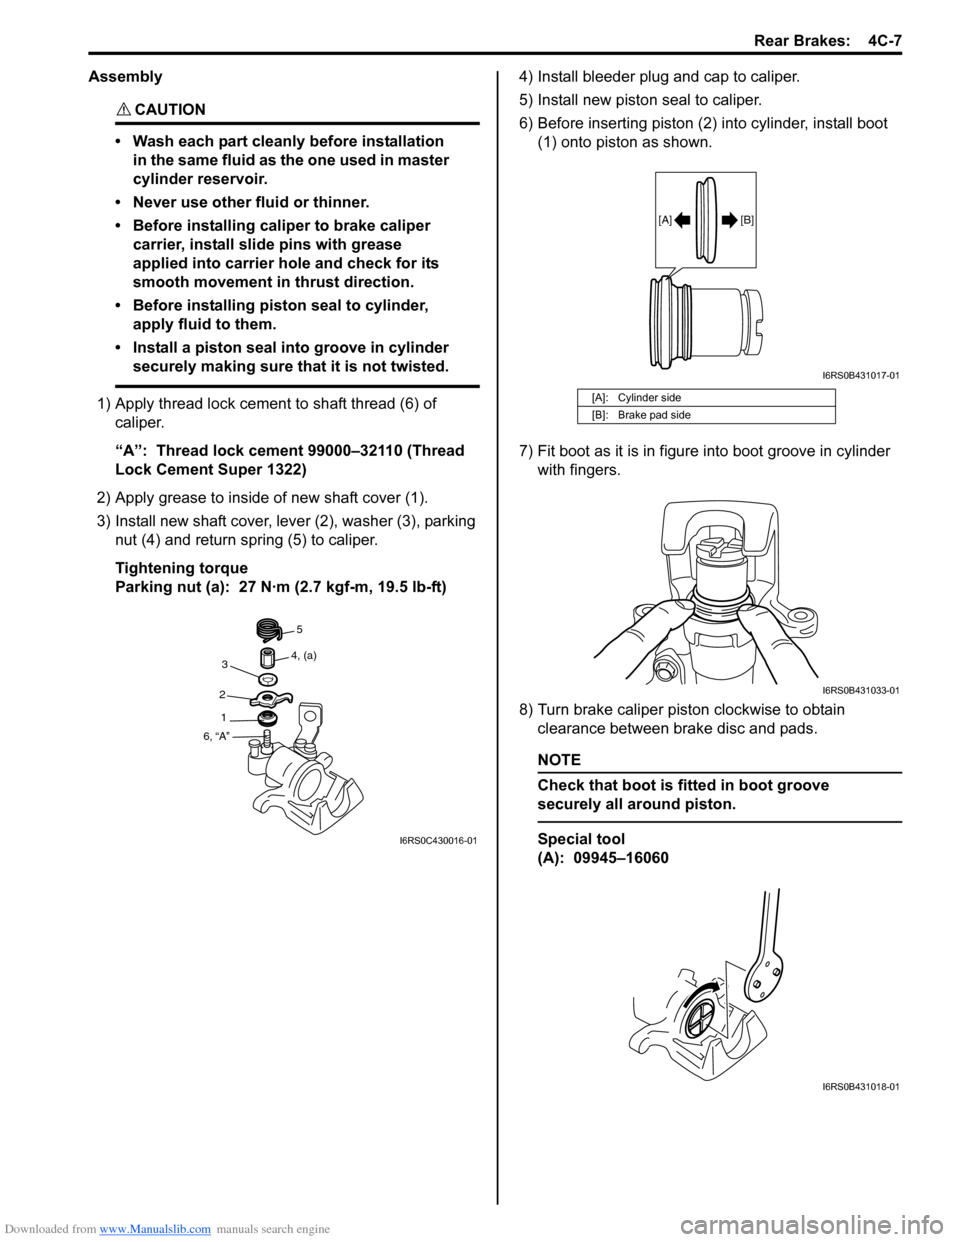 SUZUKI SWIFT 2008 2.G Service Workshop Manual Downloaded from www.Manualslib.com manuals search engine Rear Brakes:  4C-7
Assembly
CAUTION! 
• Wash each part cleanly before installation in the same fluid as the one used in master 
cylinder rese